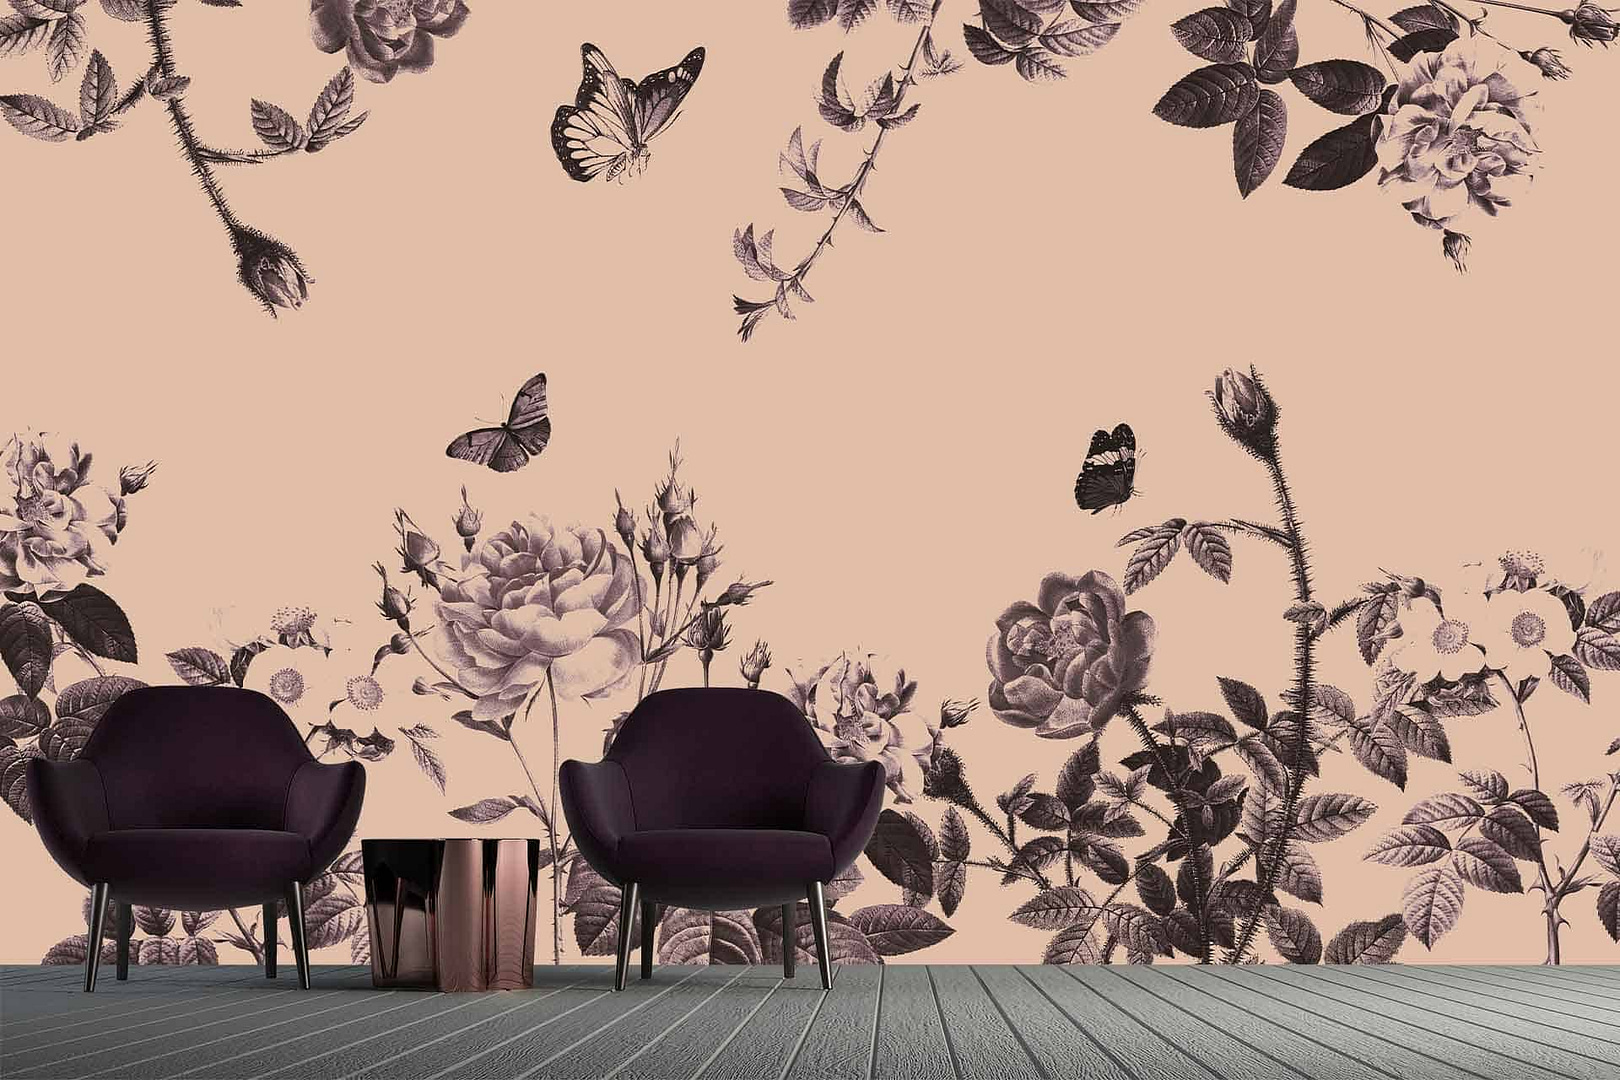 Give It Thorns - a wallpaper with vintage florals and butterflies in black and white with a peach colour overlay by Cara Saven Wall Design